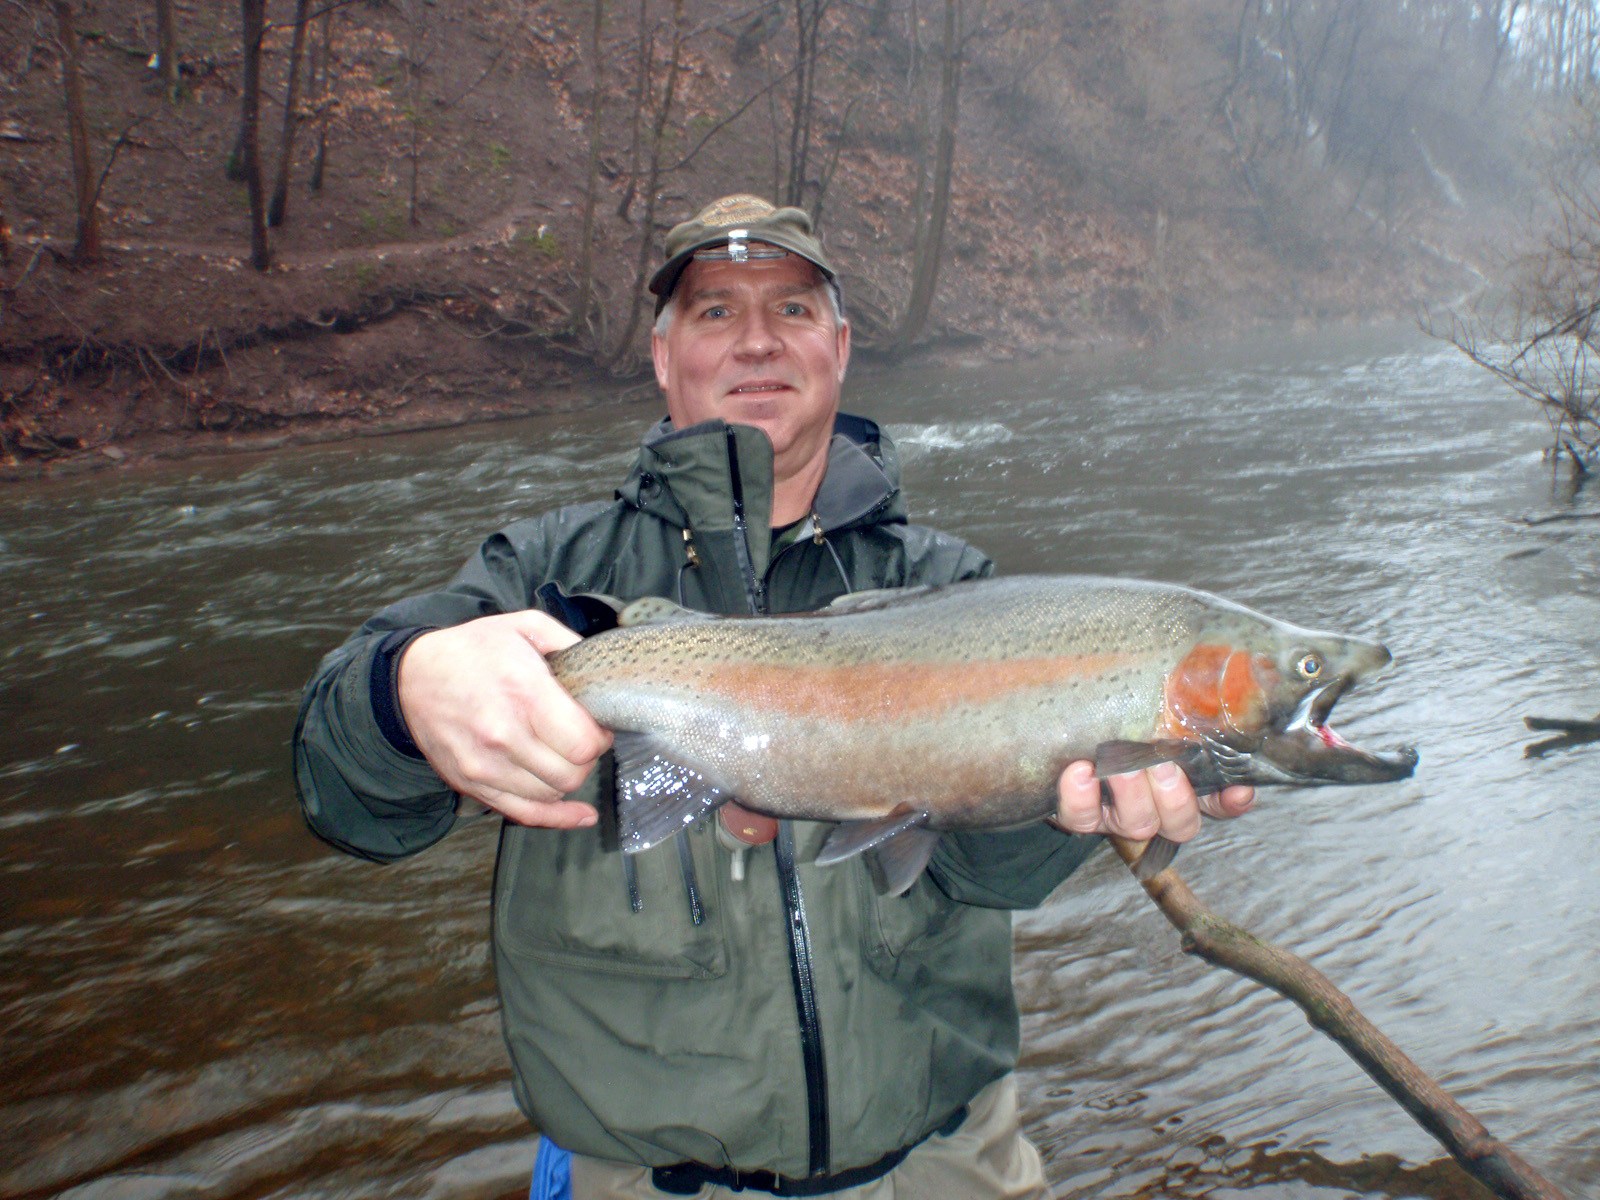 Oak Orchard River Guide Service: Salmon Fishing - Full Day